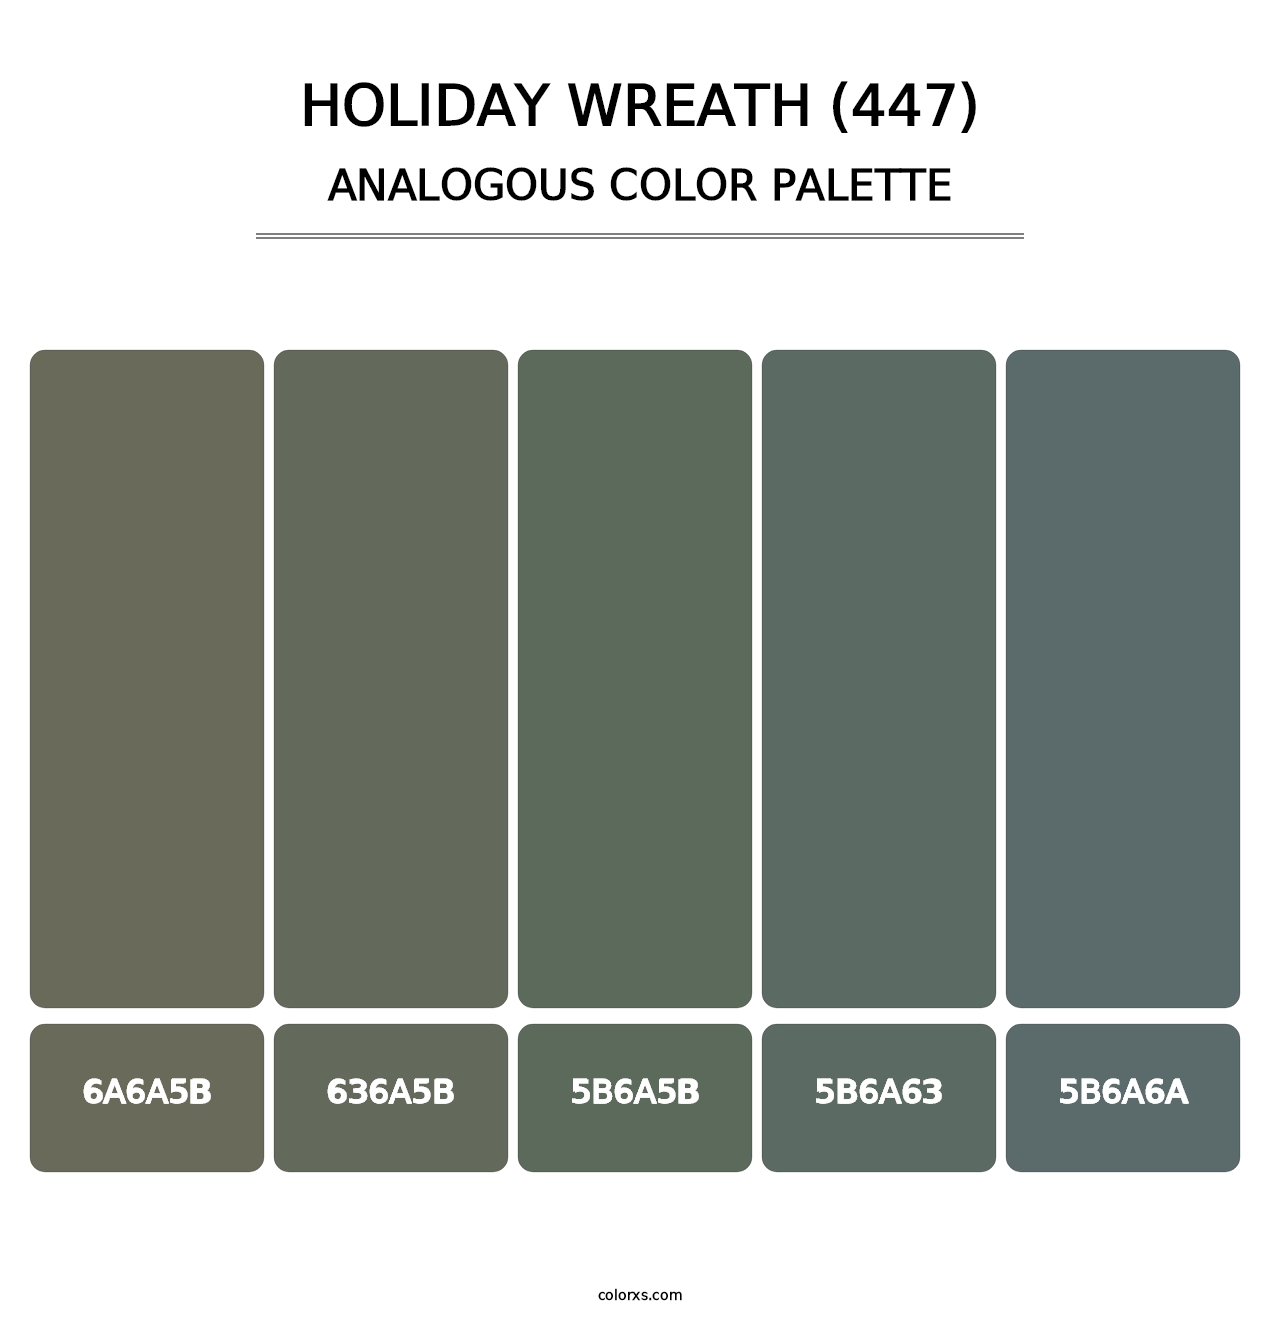 Holiday Wreath (447) - Analogous Color Palette